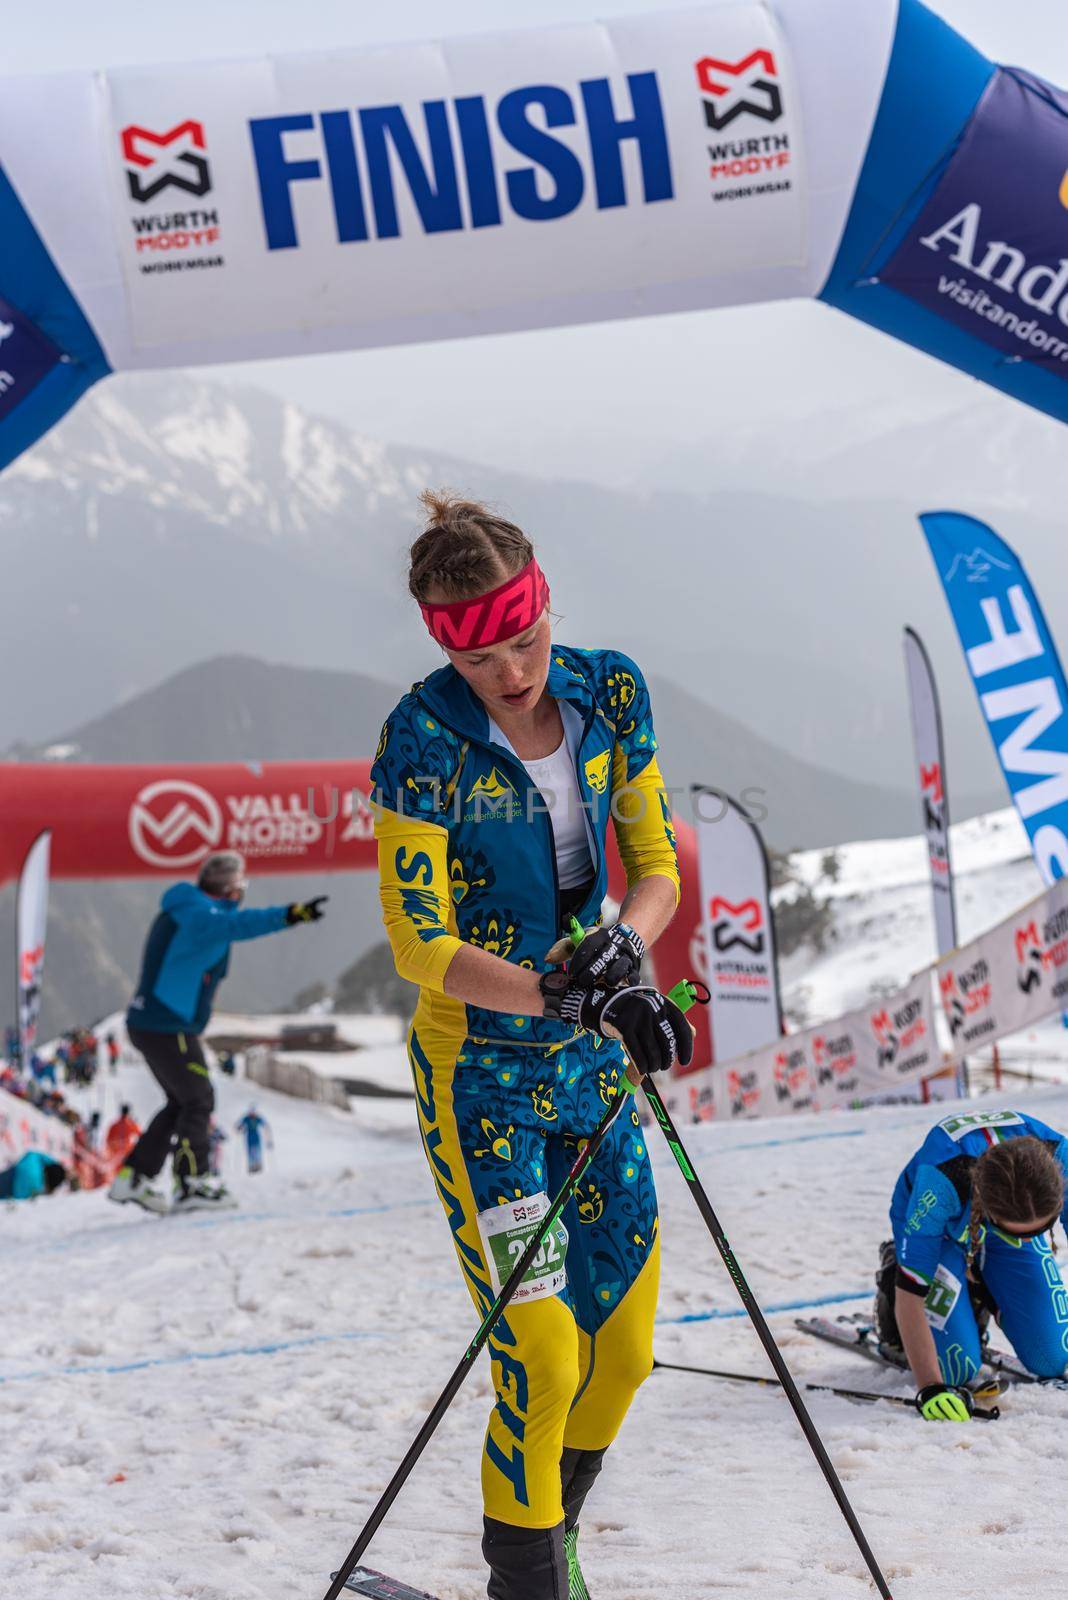 Arinsal, Andorra: 2021 March 4 :  ALEXANDERSSON Tove SWE in the finish line ISMF WC Championships Comapedrosa Andorra 2021 Vertical Race.